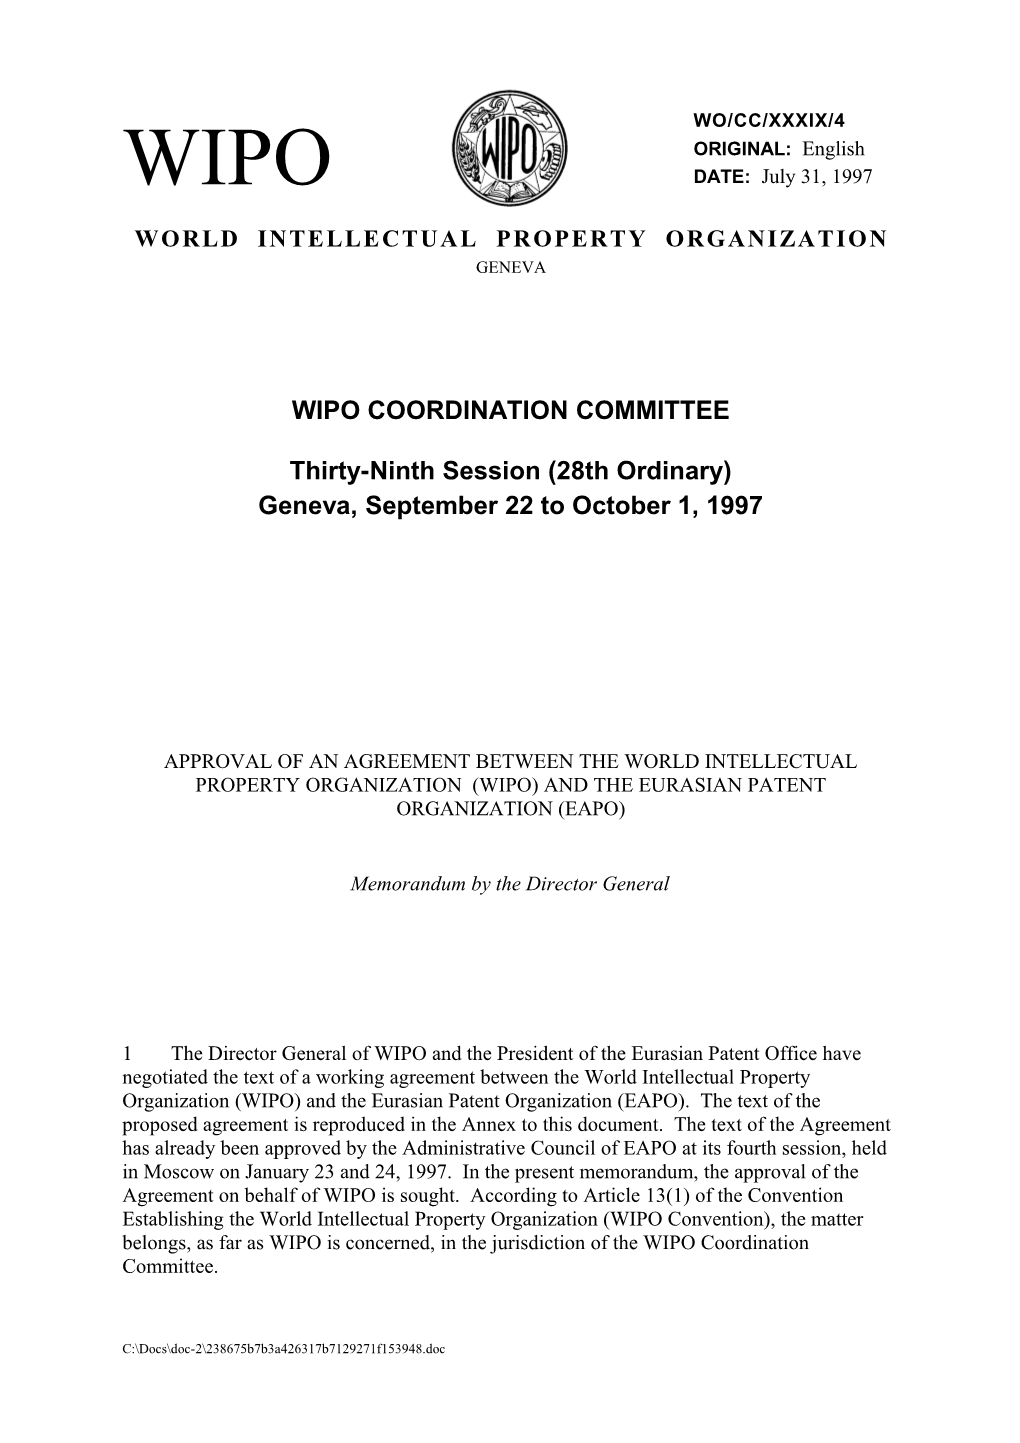 WO/CC/XXXIX/4: Approval of an Agreement Between the World Intellectual Property Organization